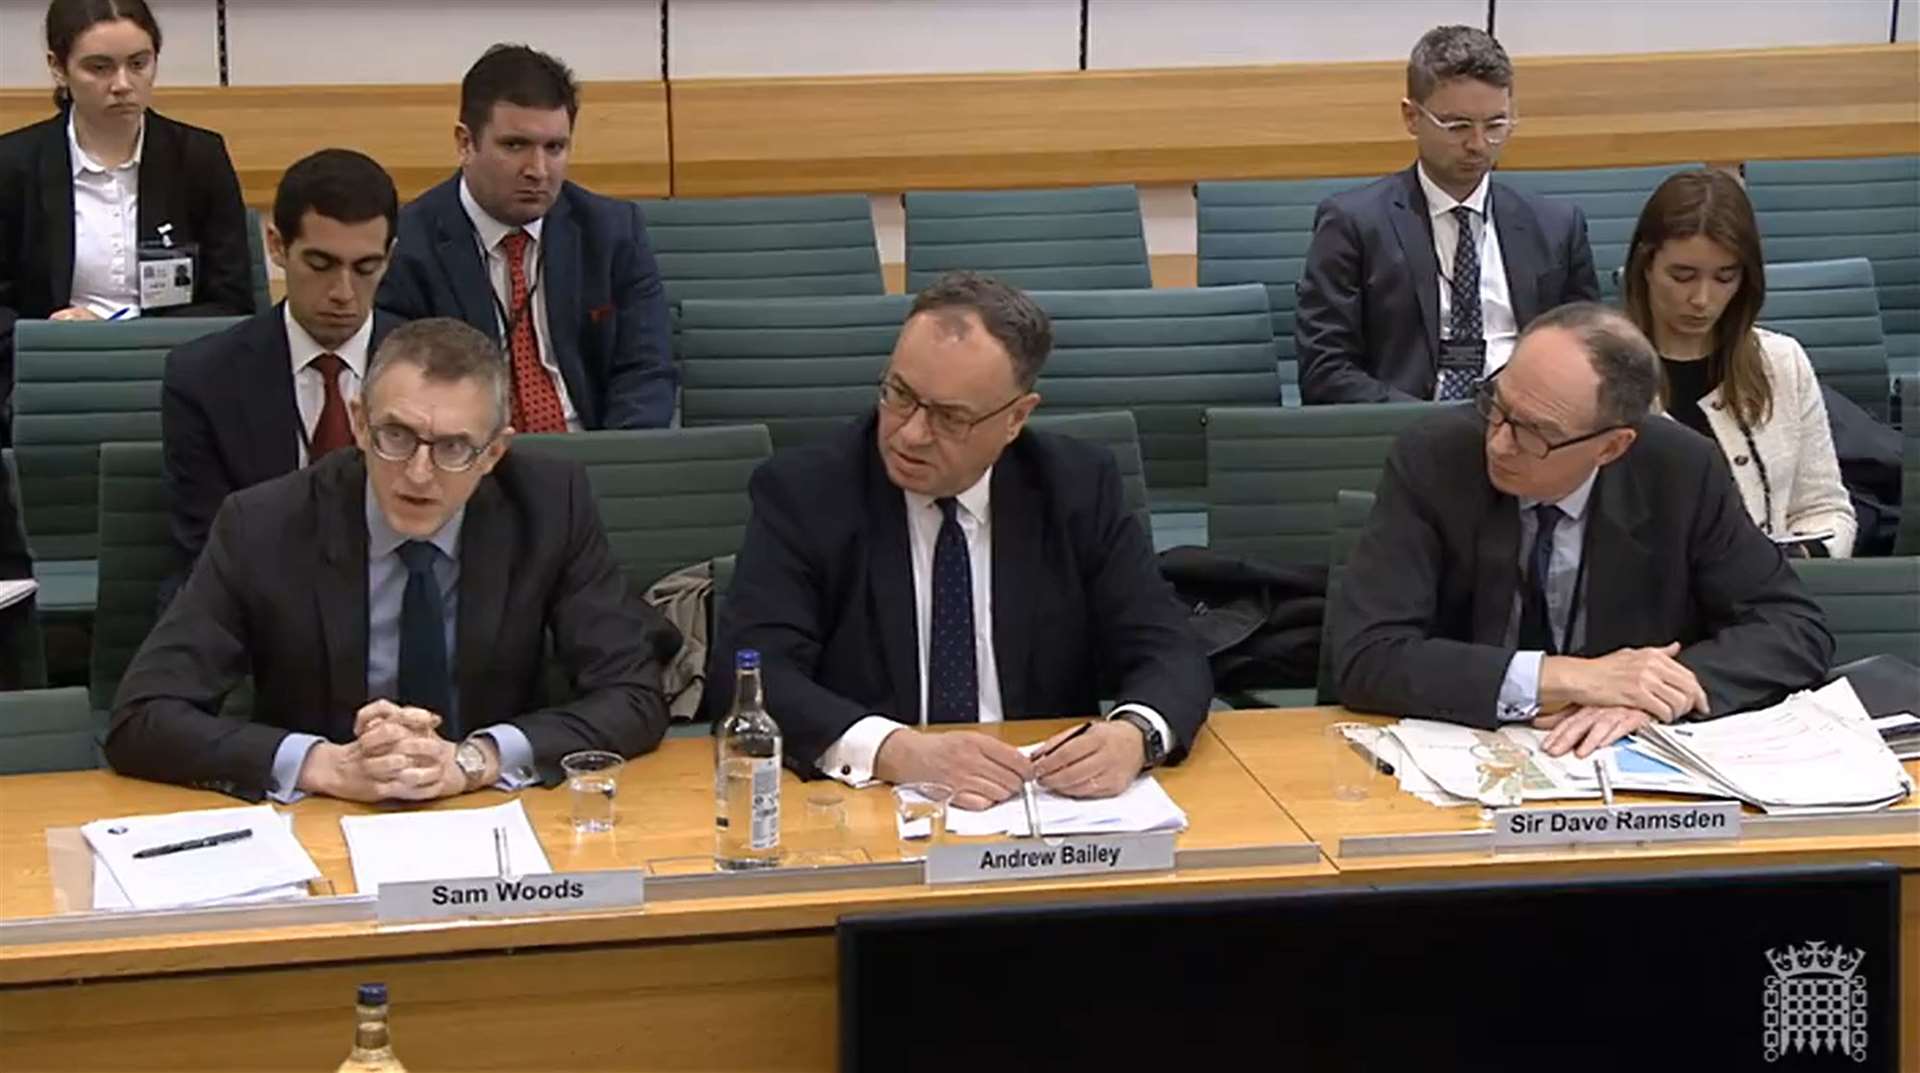 (Left to right) Deputy Governor for Prudential Regulation and Chief Executive Officer of the Prudential Regulation Authority Sam Woods, Governor of the Bank of England Andrew Bailey and Bank of England’s Deputy Governor for Markets and Banking Dave Ramsden (house of Commons/PA)